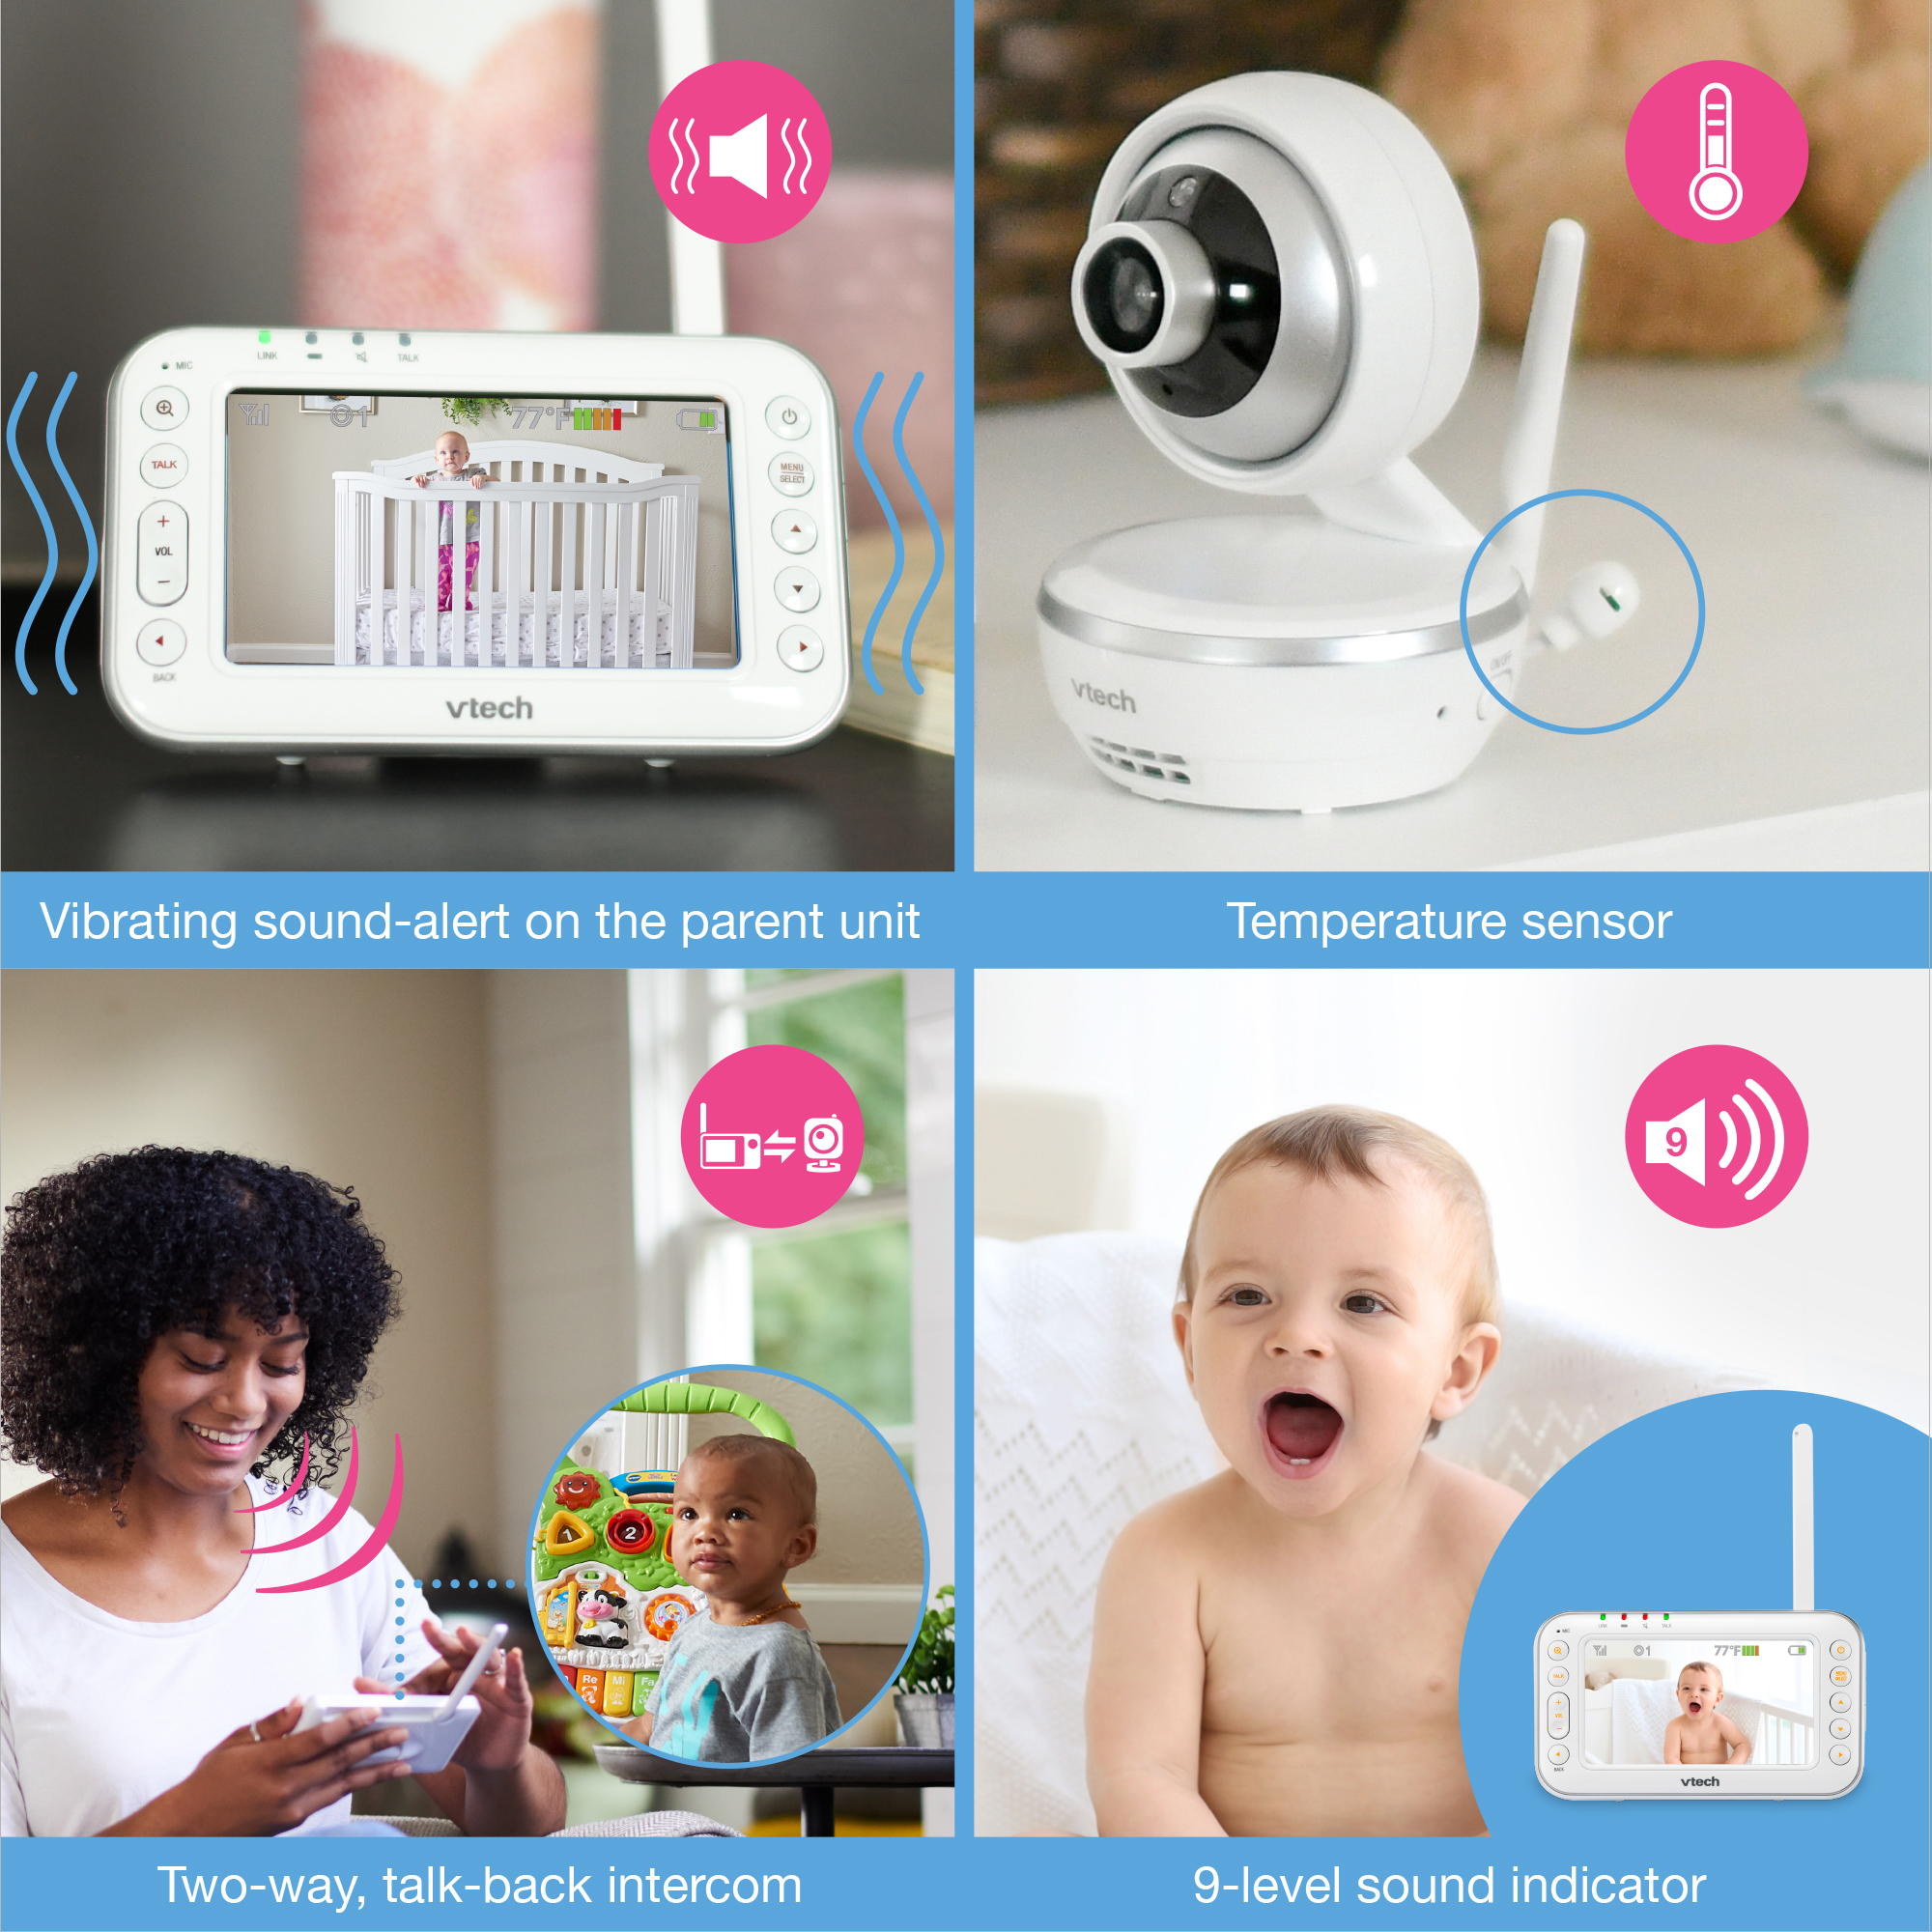 VTech VM4261, 4.3" Digital Video Baby Monitor with Pan & Tilt Camera, Wide-Angle Lens and Standard Lens, White - image 11 of 13